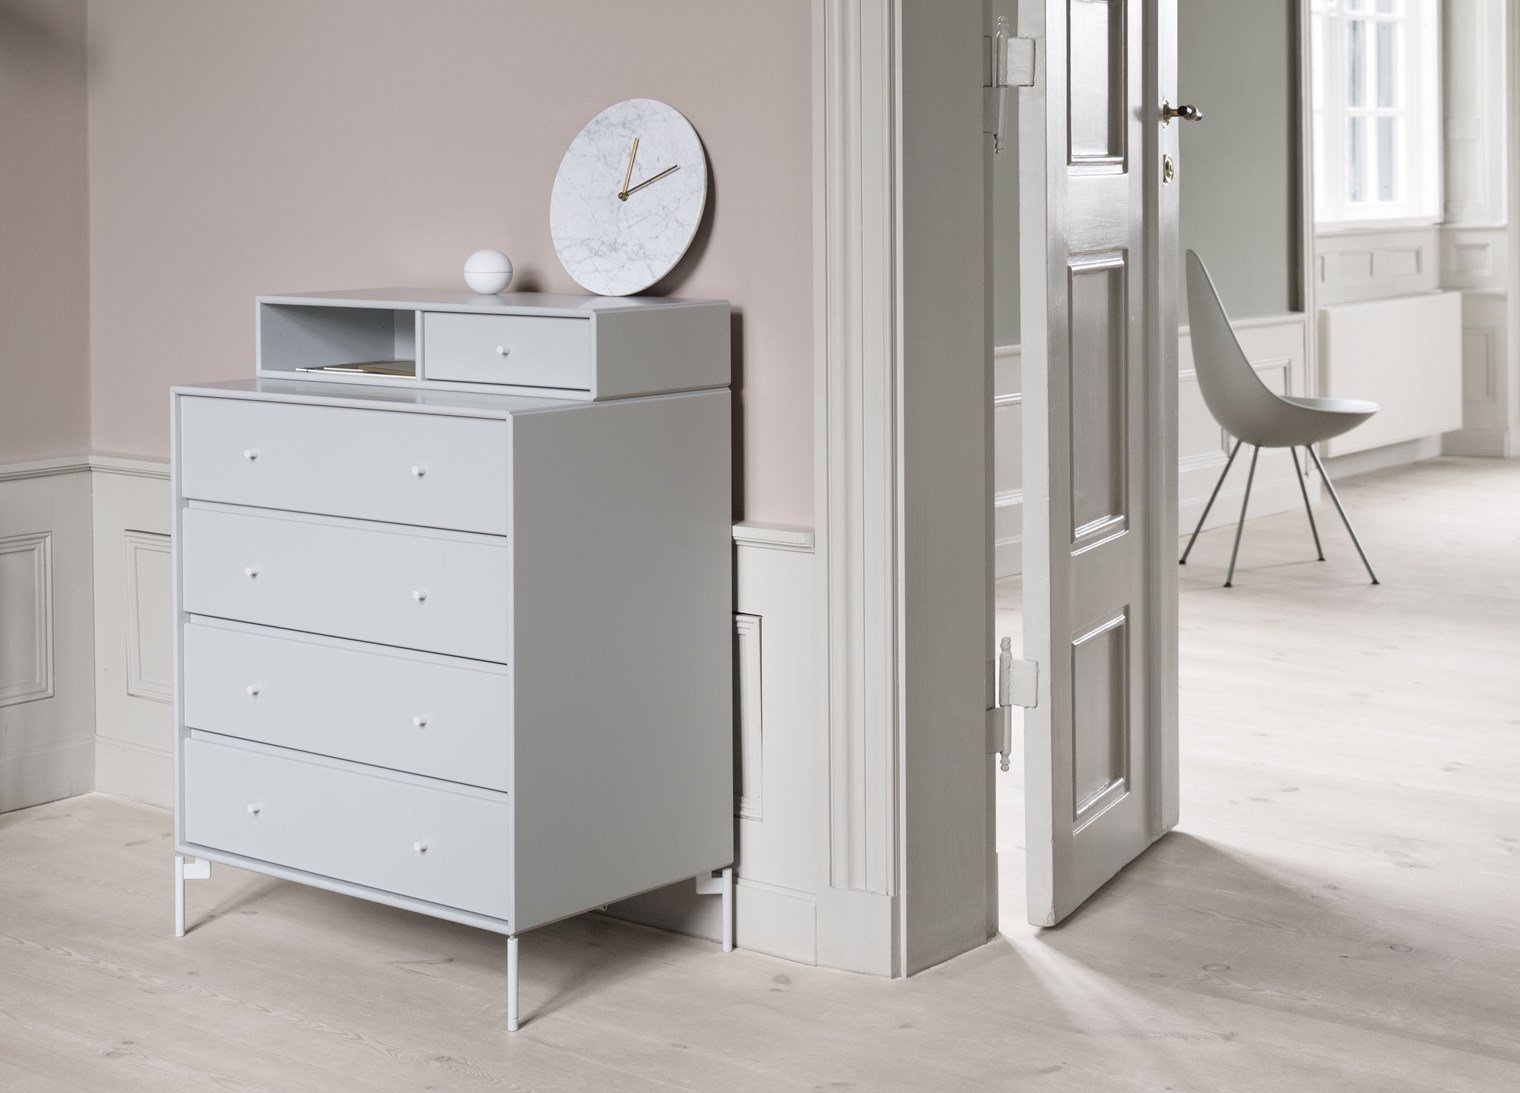 Montana Keep Bre of Drawers med 7 cm piedestal, Nordic White